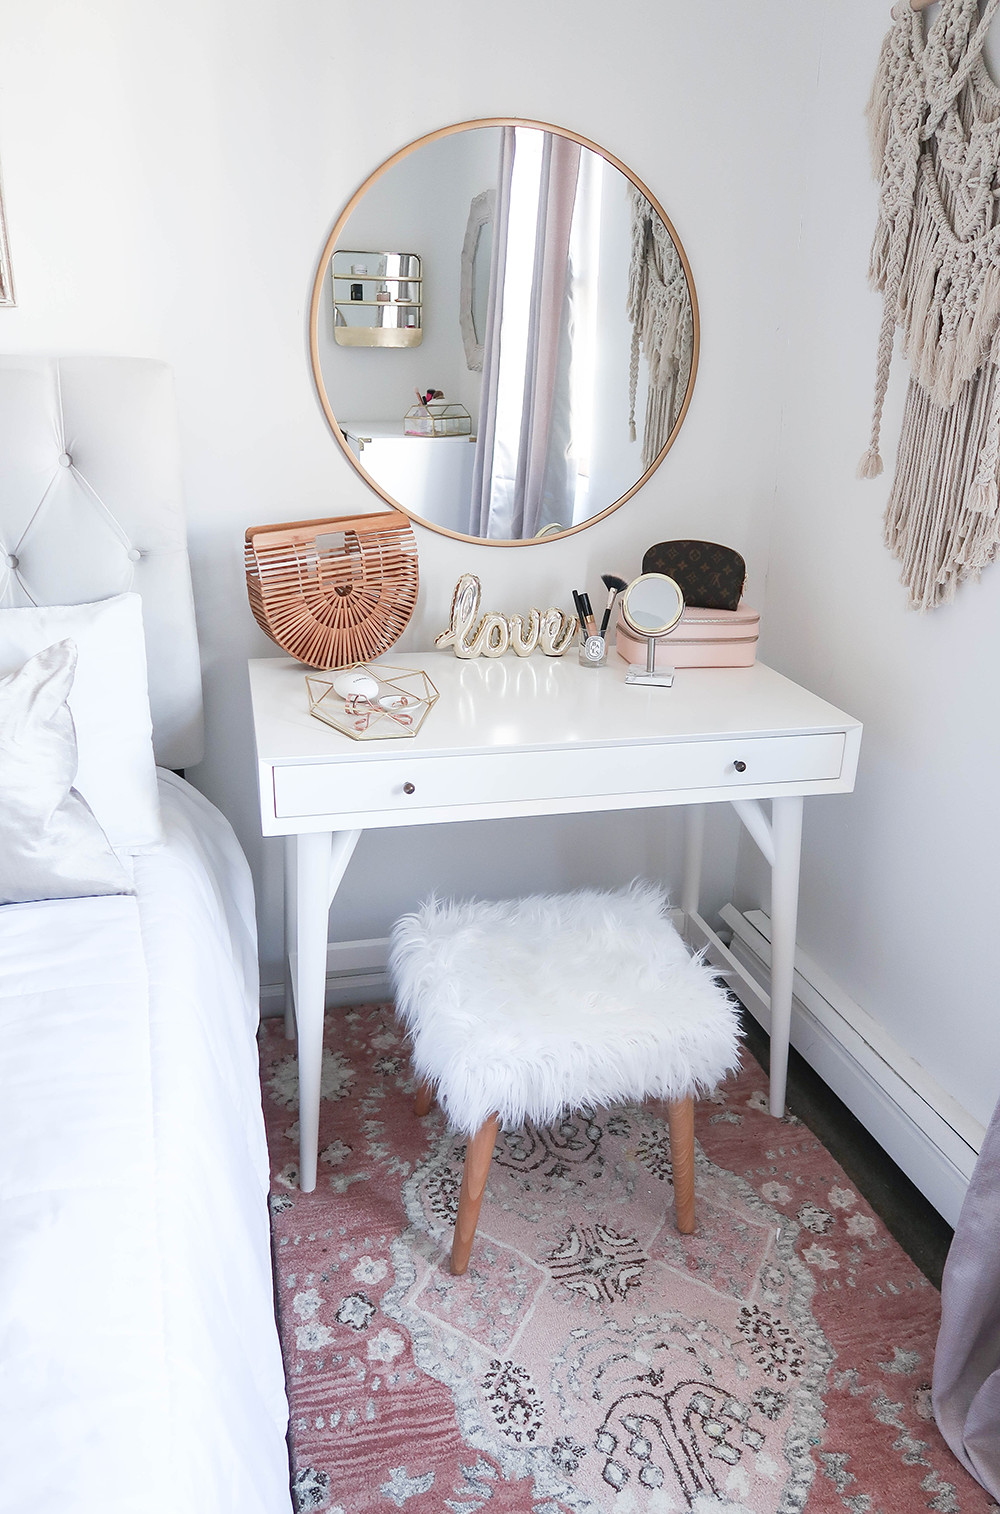 Small Bedroom Vanity
 Styling A Vanity In A Small Space – Money Can Buy Lipstick